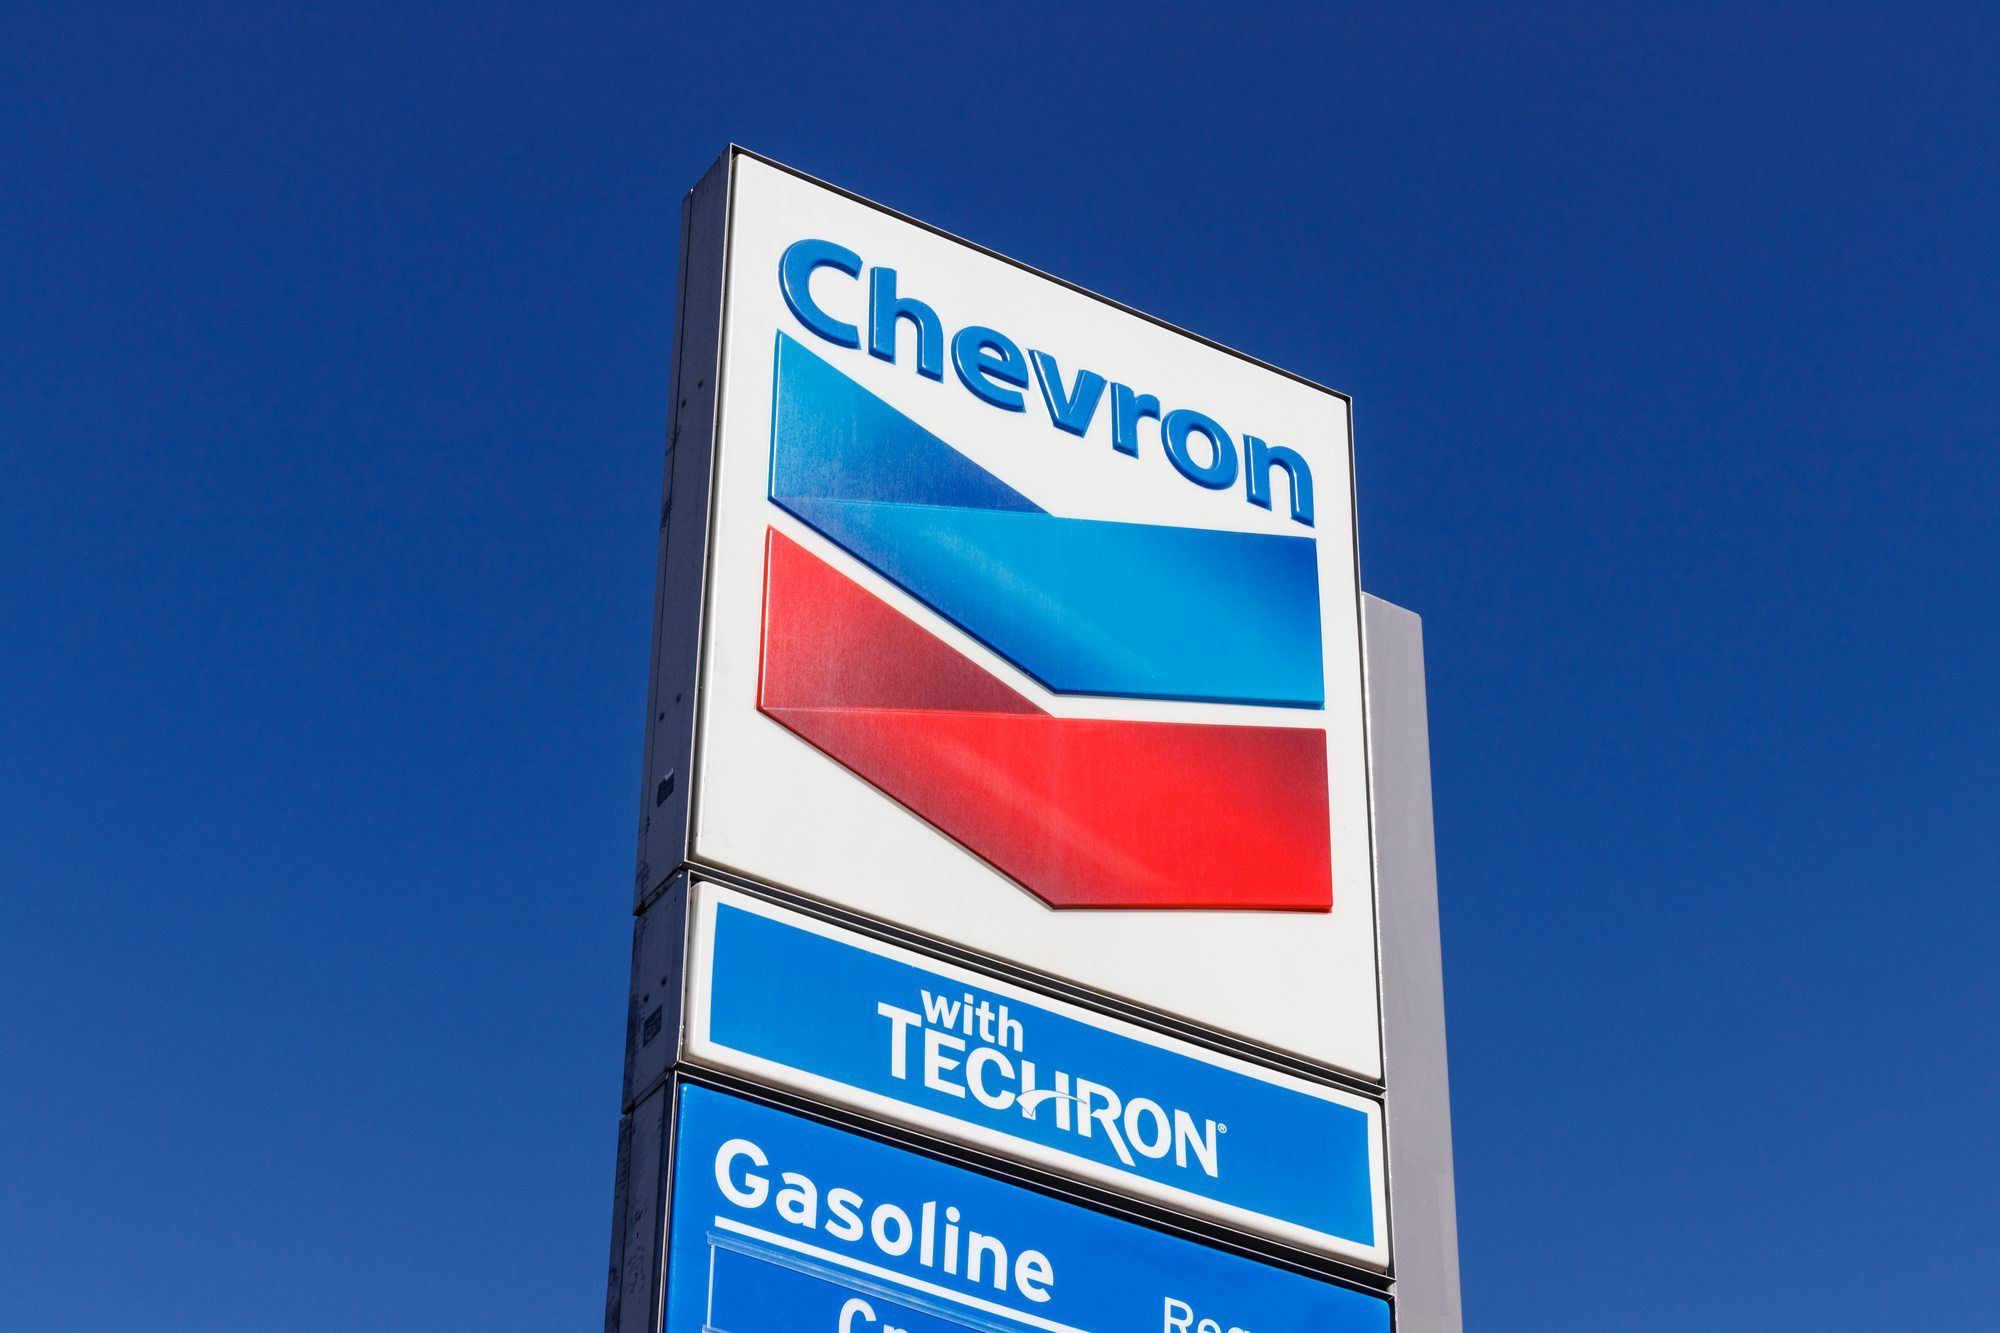 Chevron Used ‘Accounting Tricks’ to Underpay Landowners for Mined Gas class action